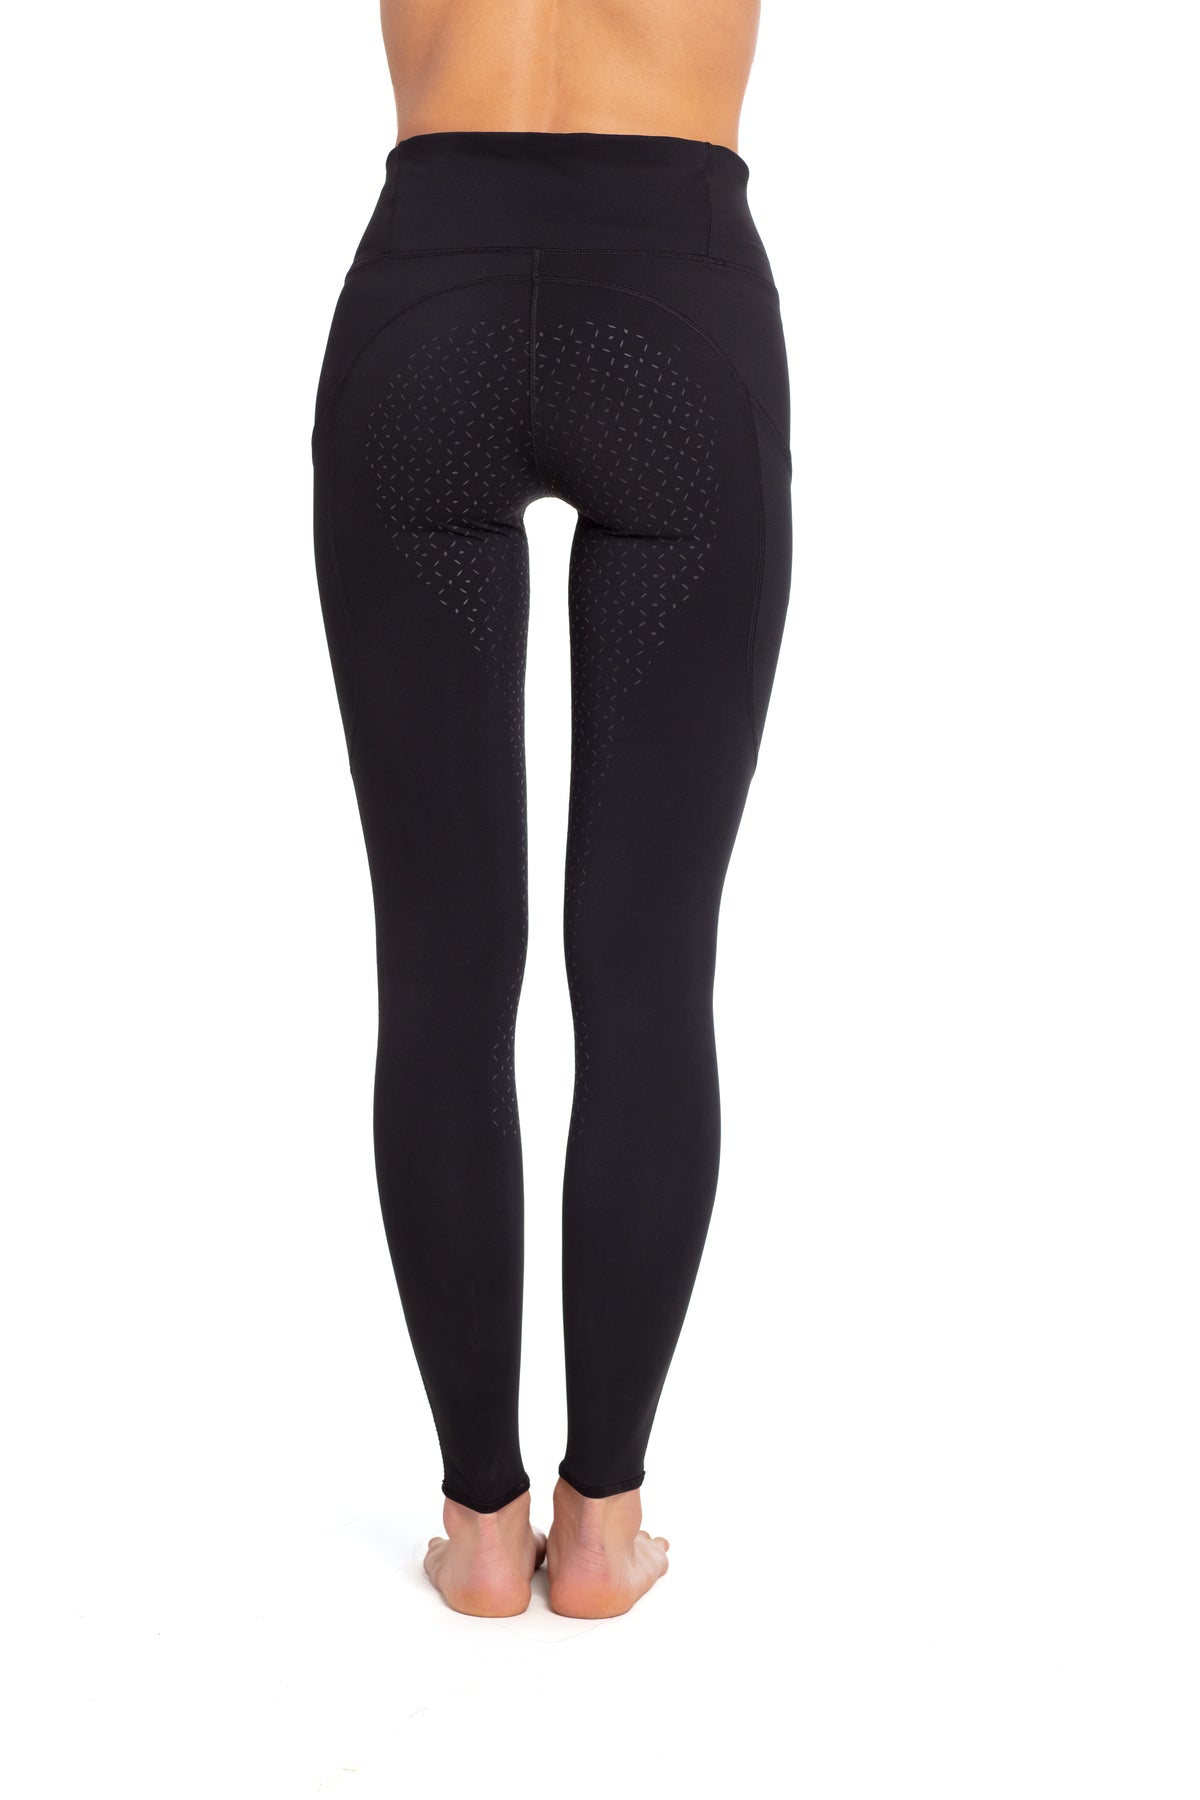 Bodysculpting Seamless Tights, Full Seat - by Goode Rider